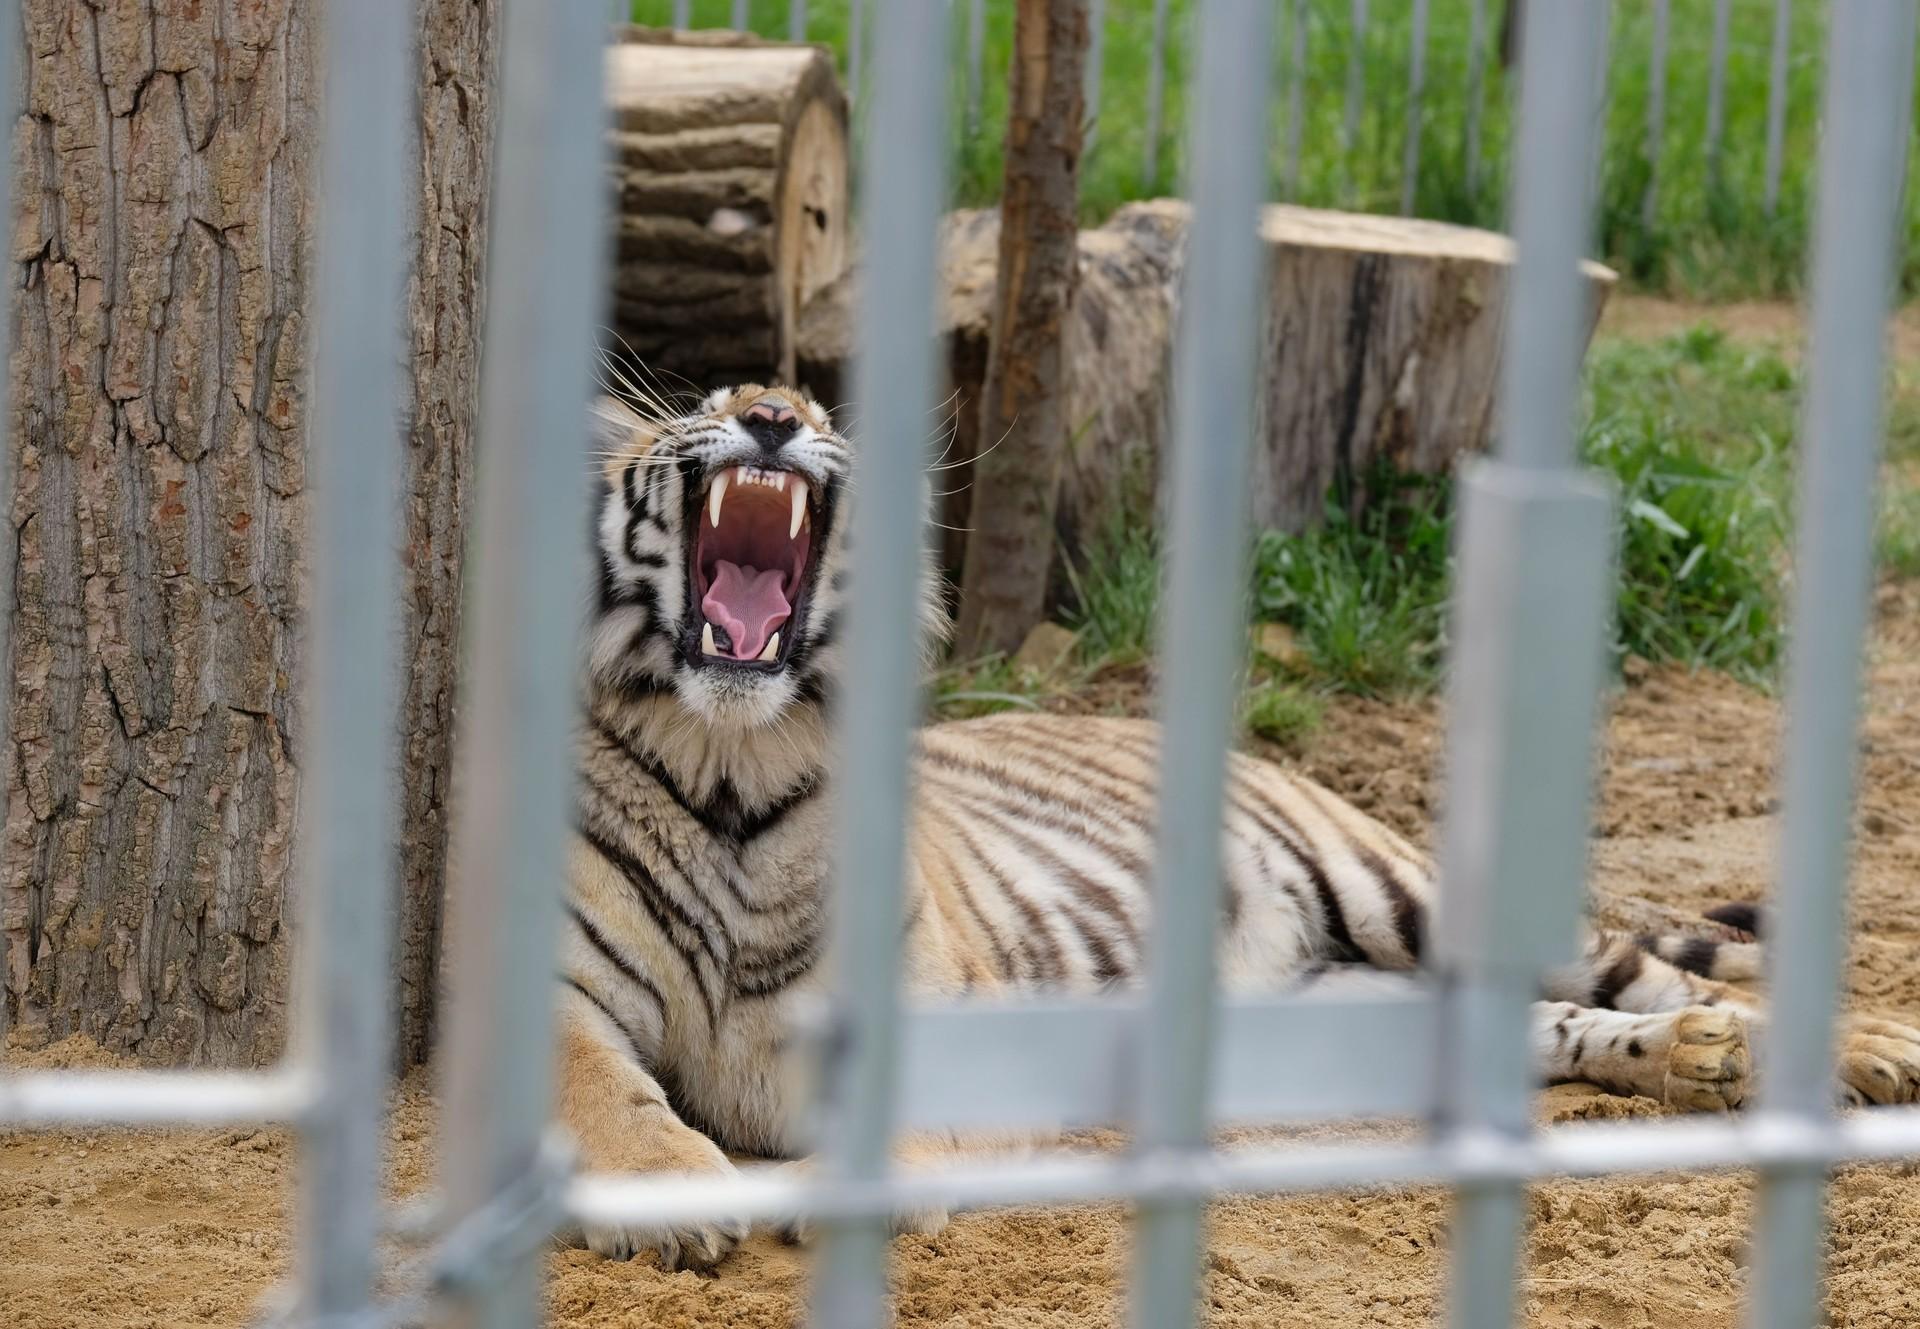 The launch of Tiger King 2 on Netflix and the suffering of captive tigers  and other big cat species in the EU and worldwide - FOUR PAWS International  - Animal Welfare Organisation